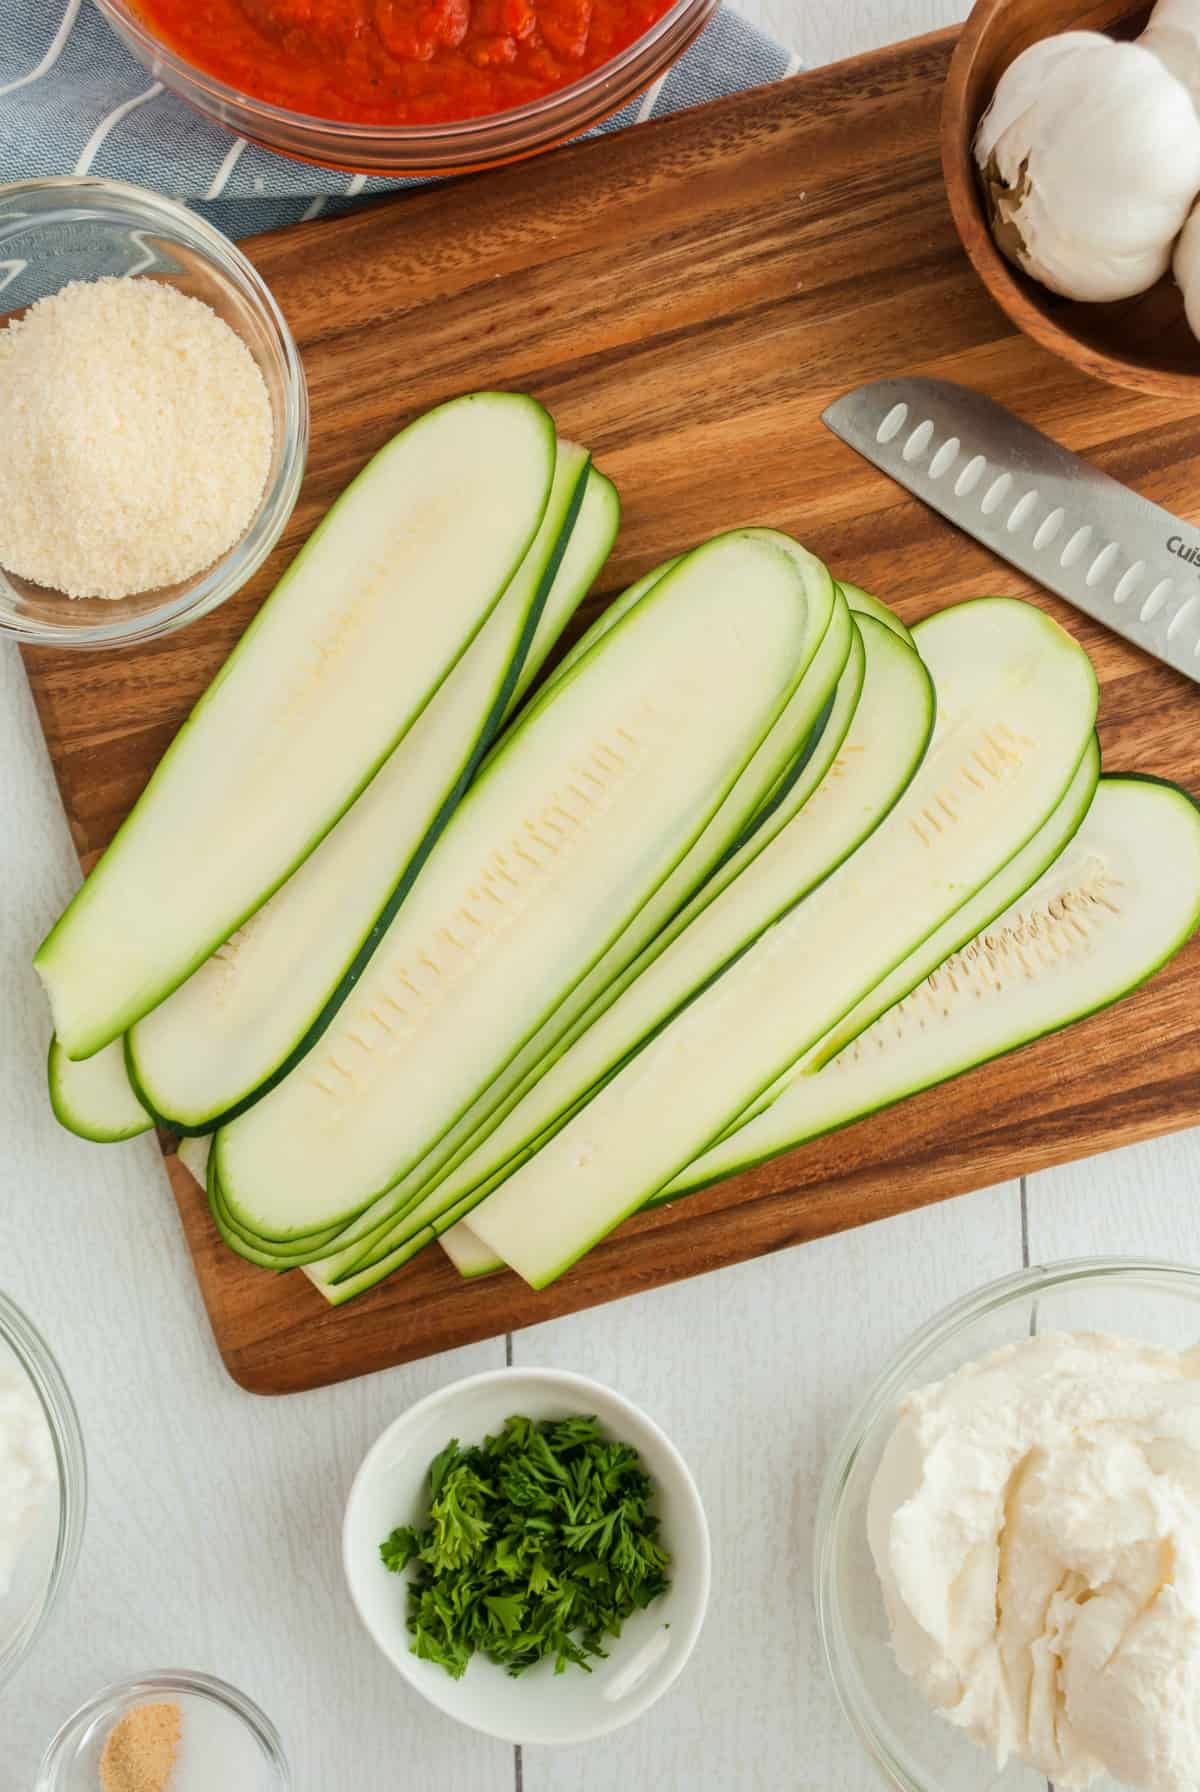 Thinly sliced zucchini strips on a wooden cutting board with remaining ingredients for lasagna roll ups.